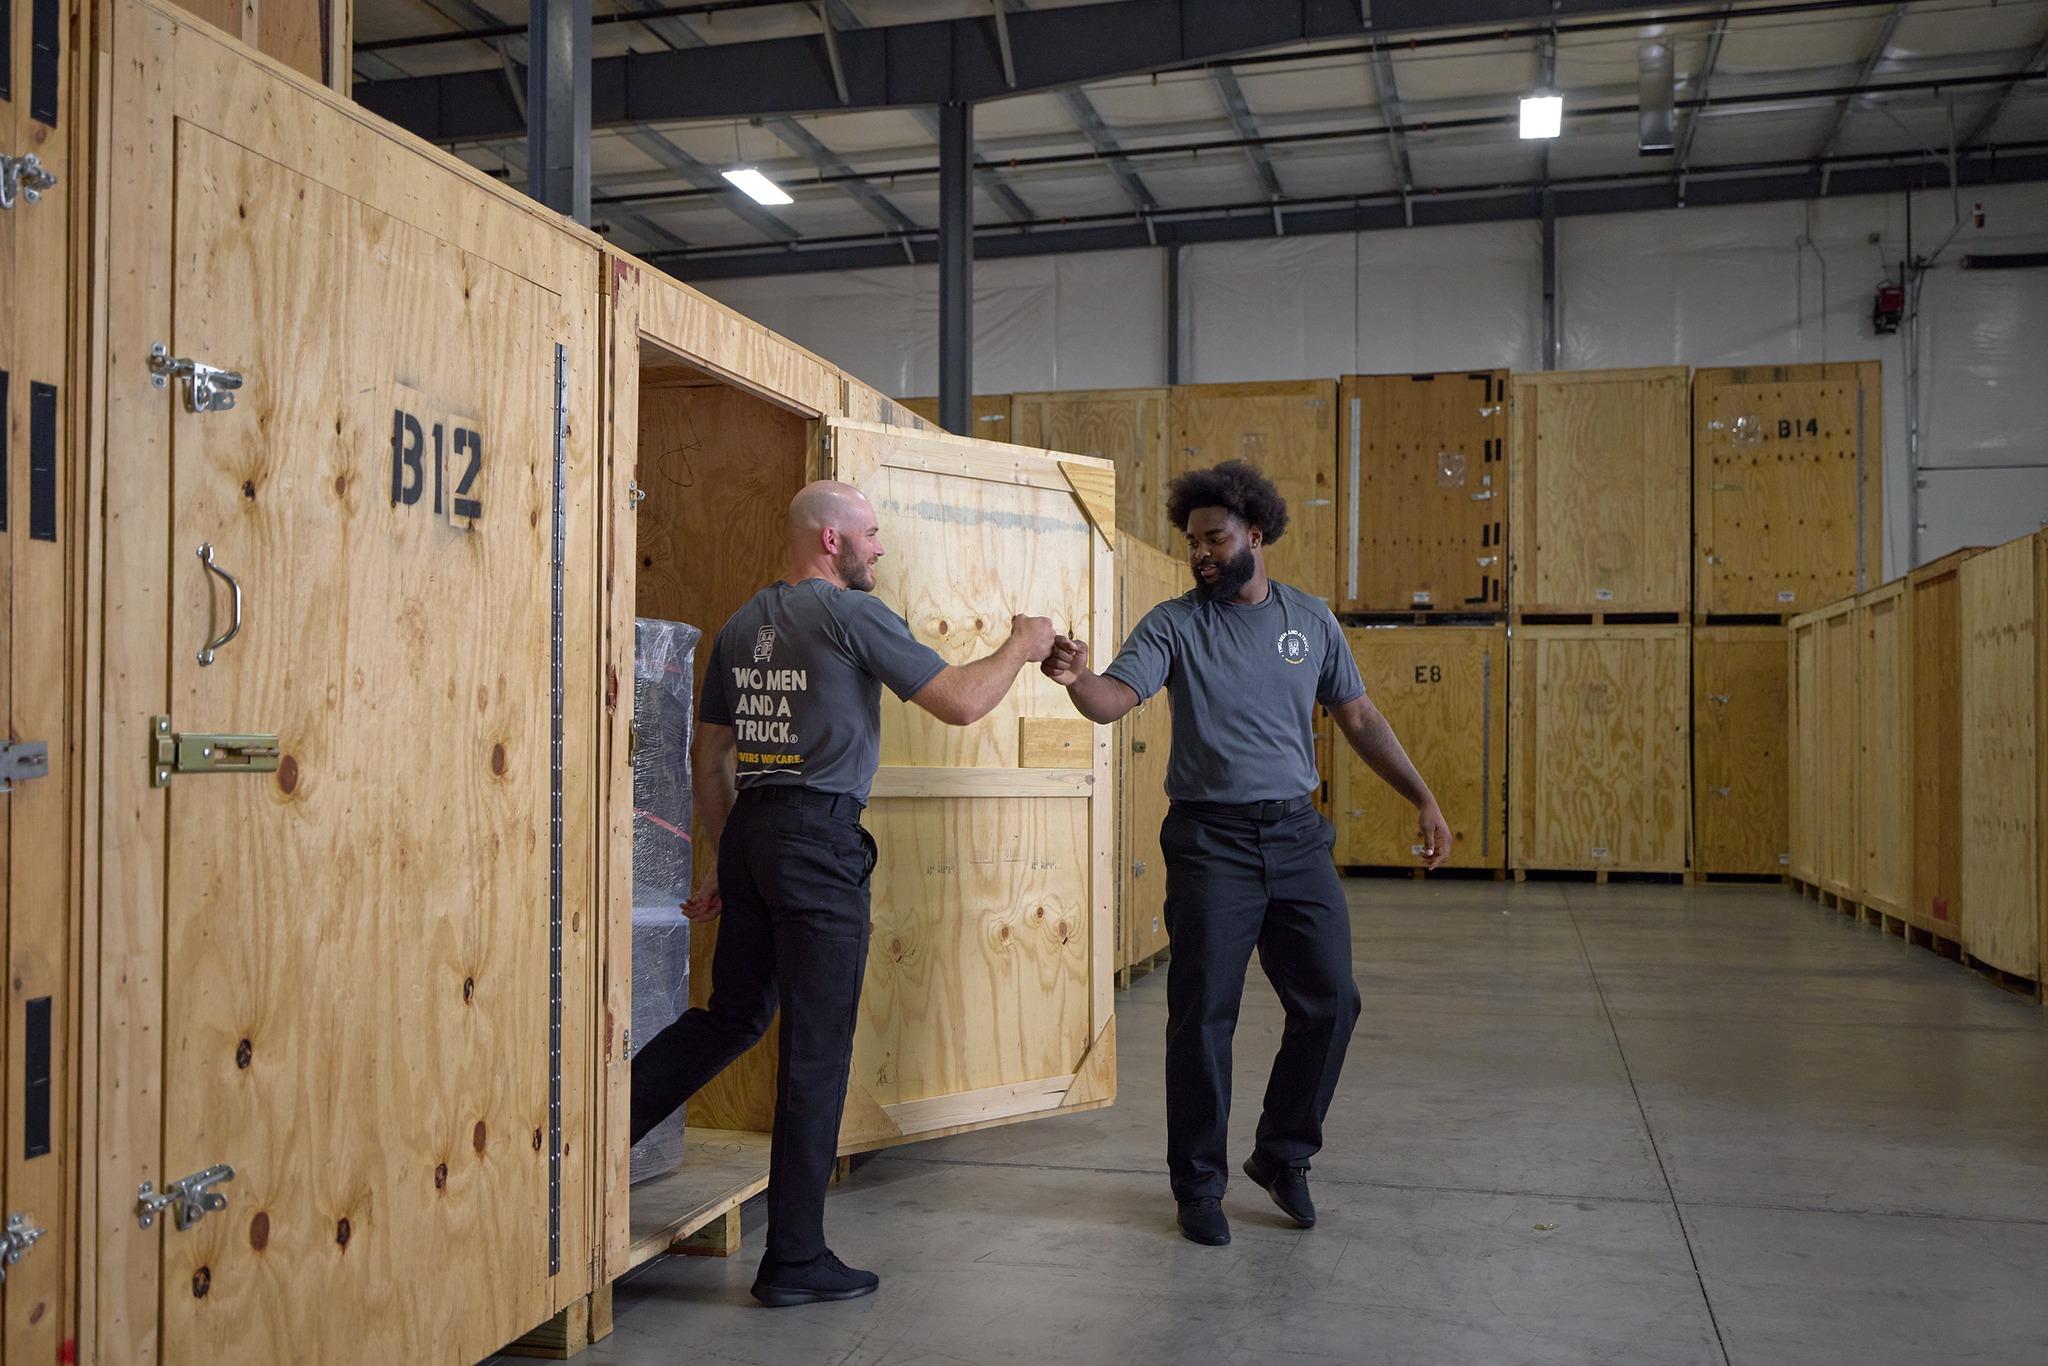 Two movers fist bumping in front of storage crates